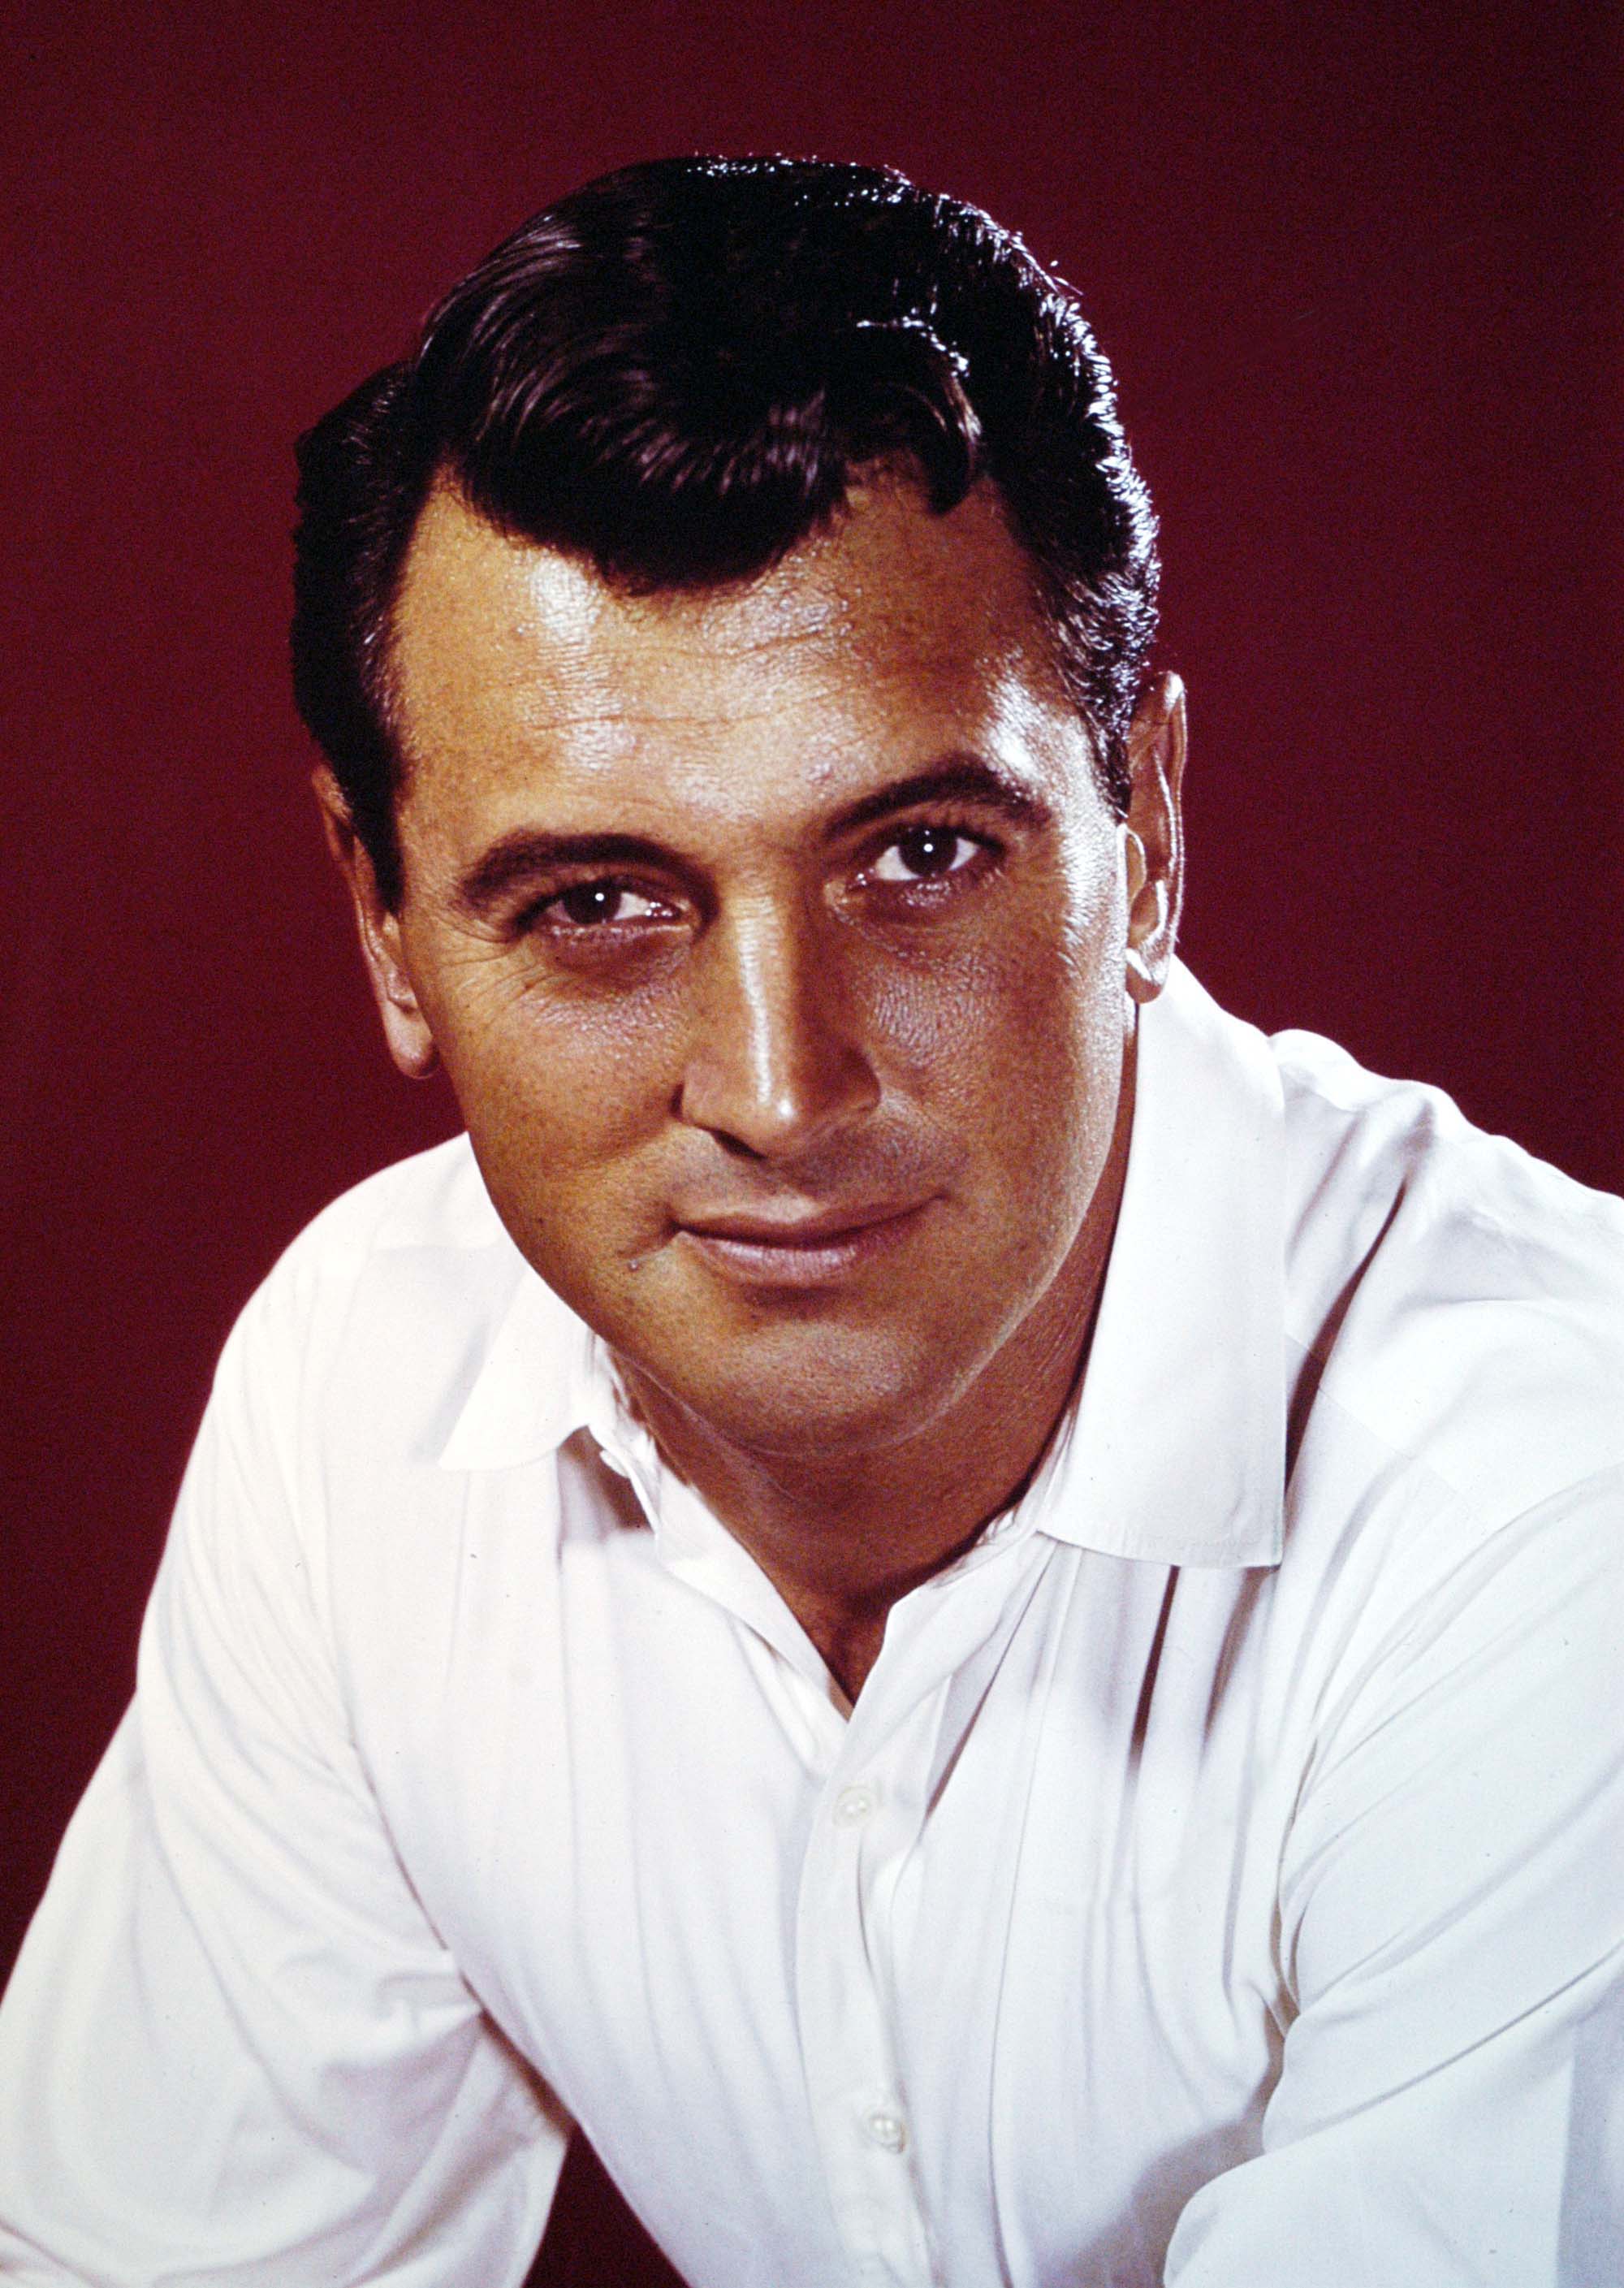 Actor Rock Hudson circa 1969 | Source: Getty Images